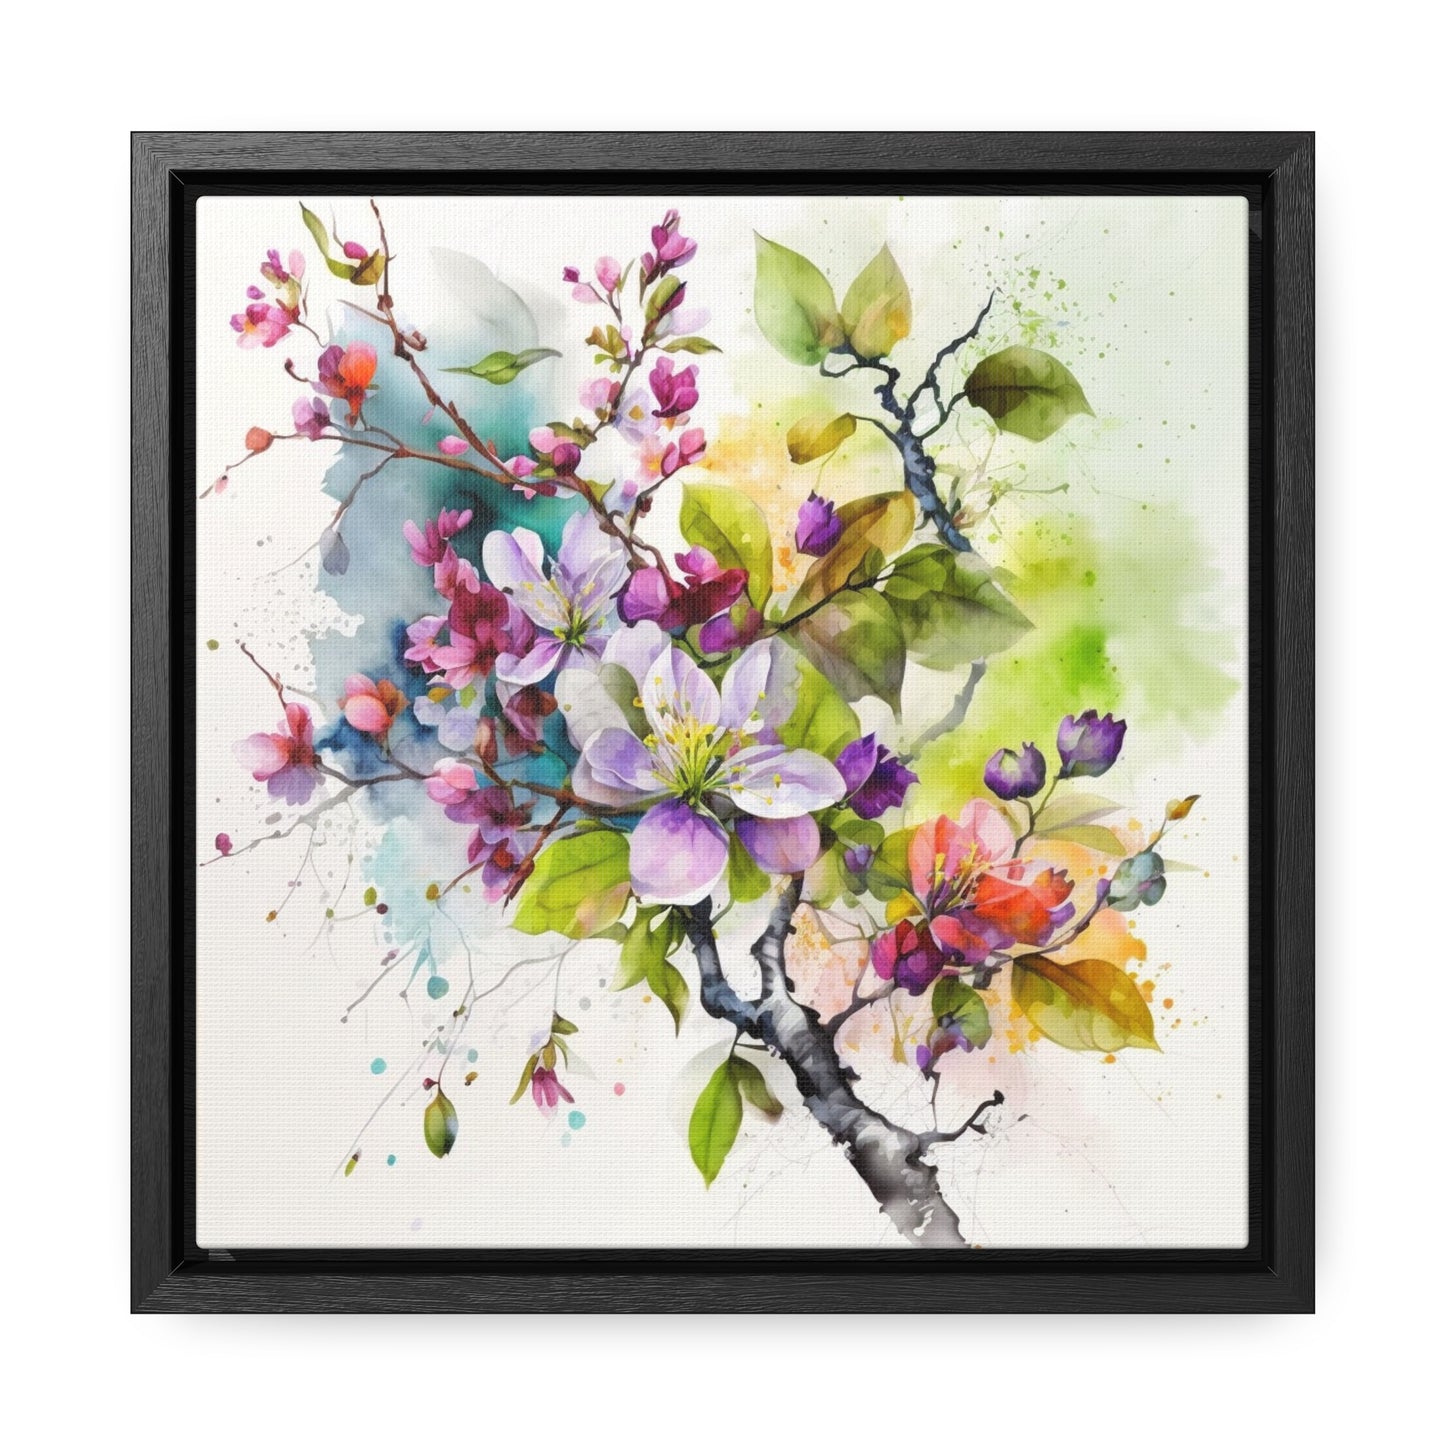 Gallery Canvas Wraps, Square Frame Mother Nature Bright Spring Colors Realistic Watercolor 4